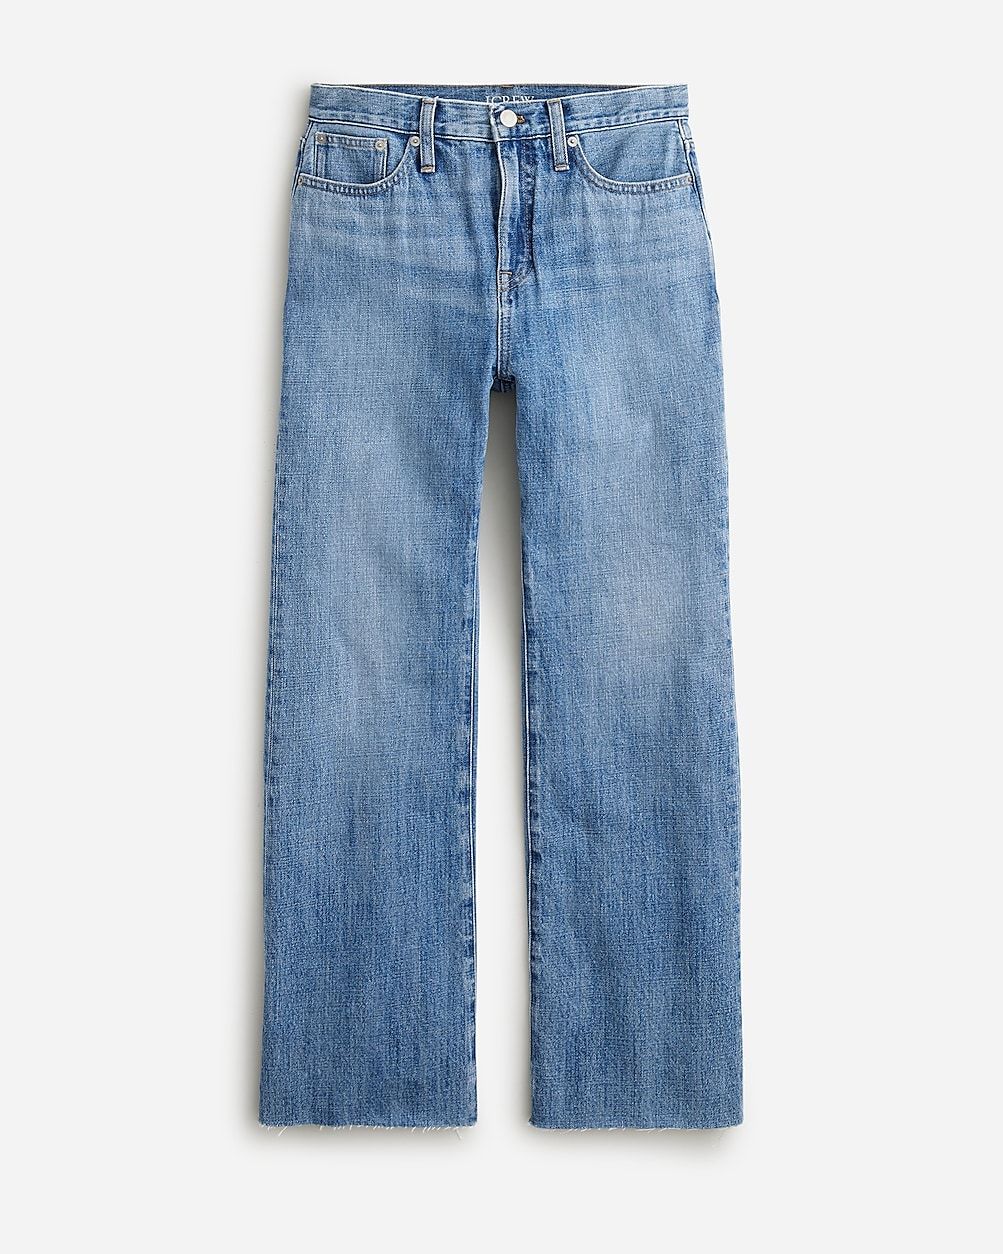 Mid-rise relaxed demi-boot jean in Kamila wash | J.Crew US